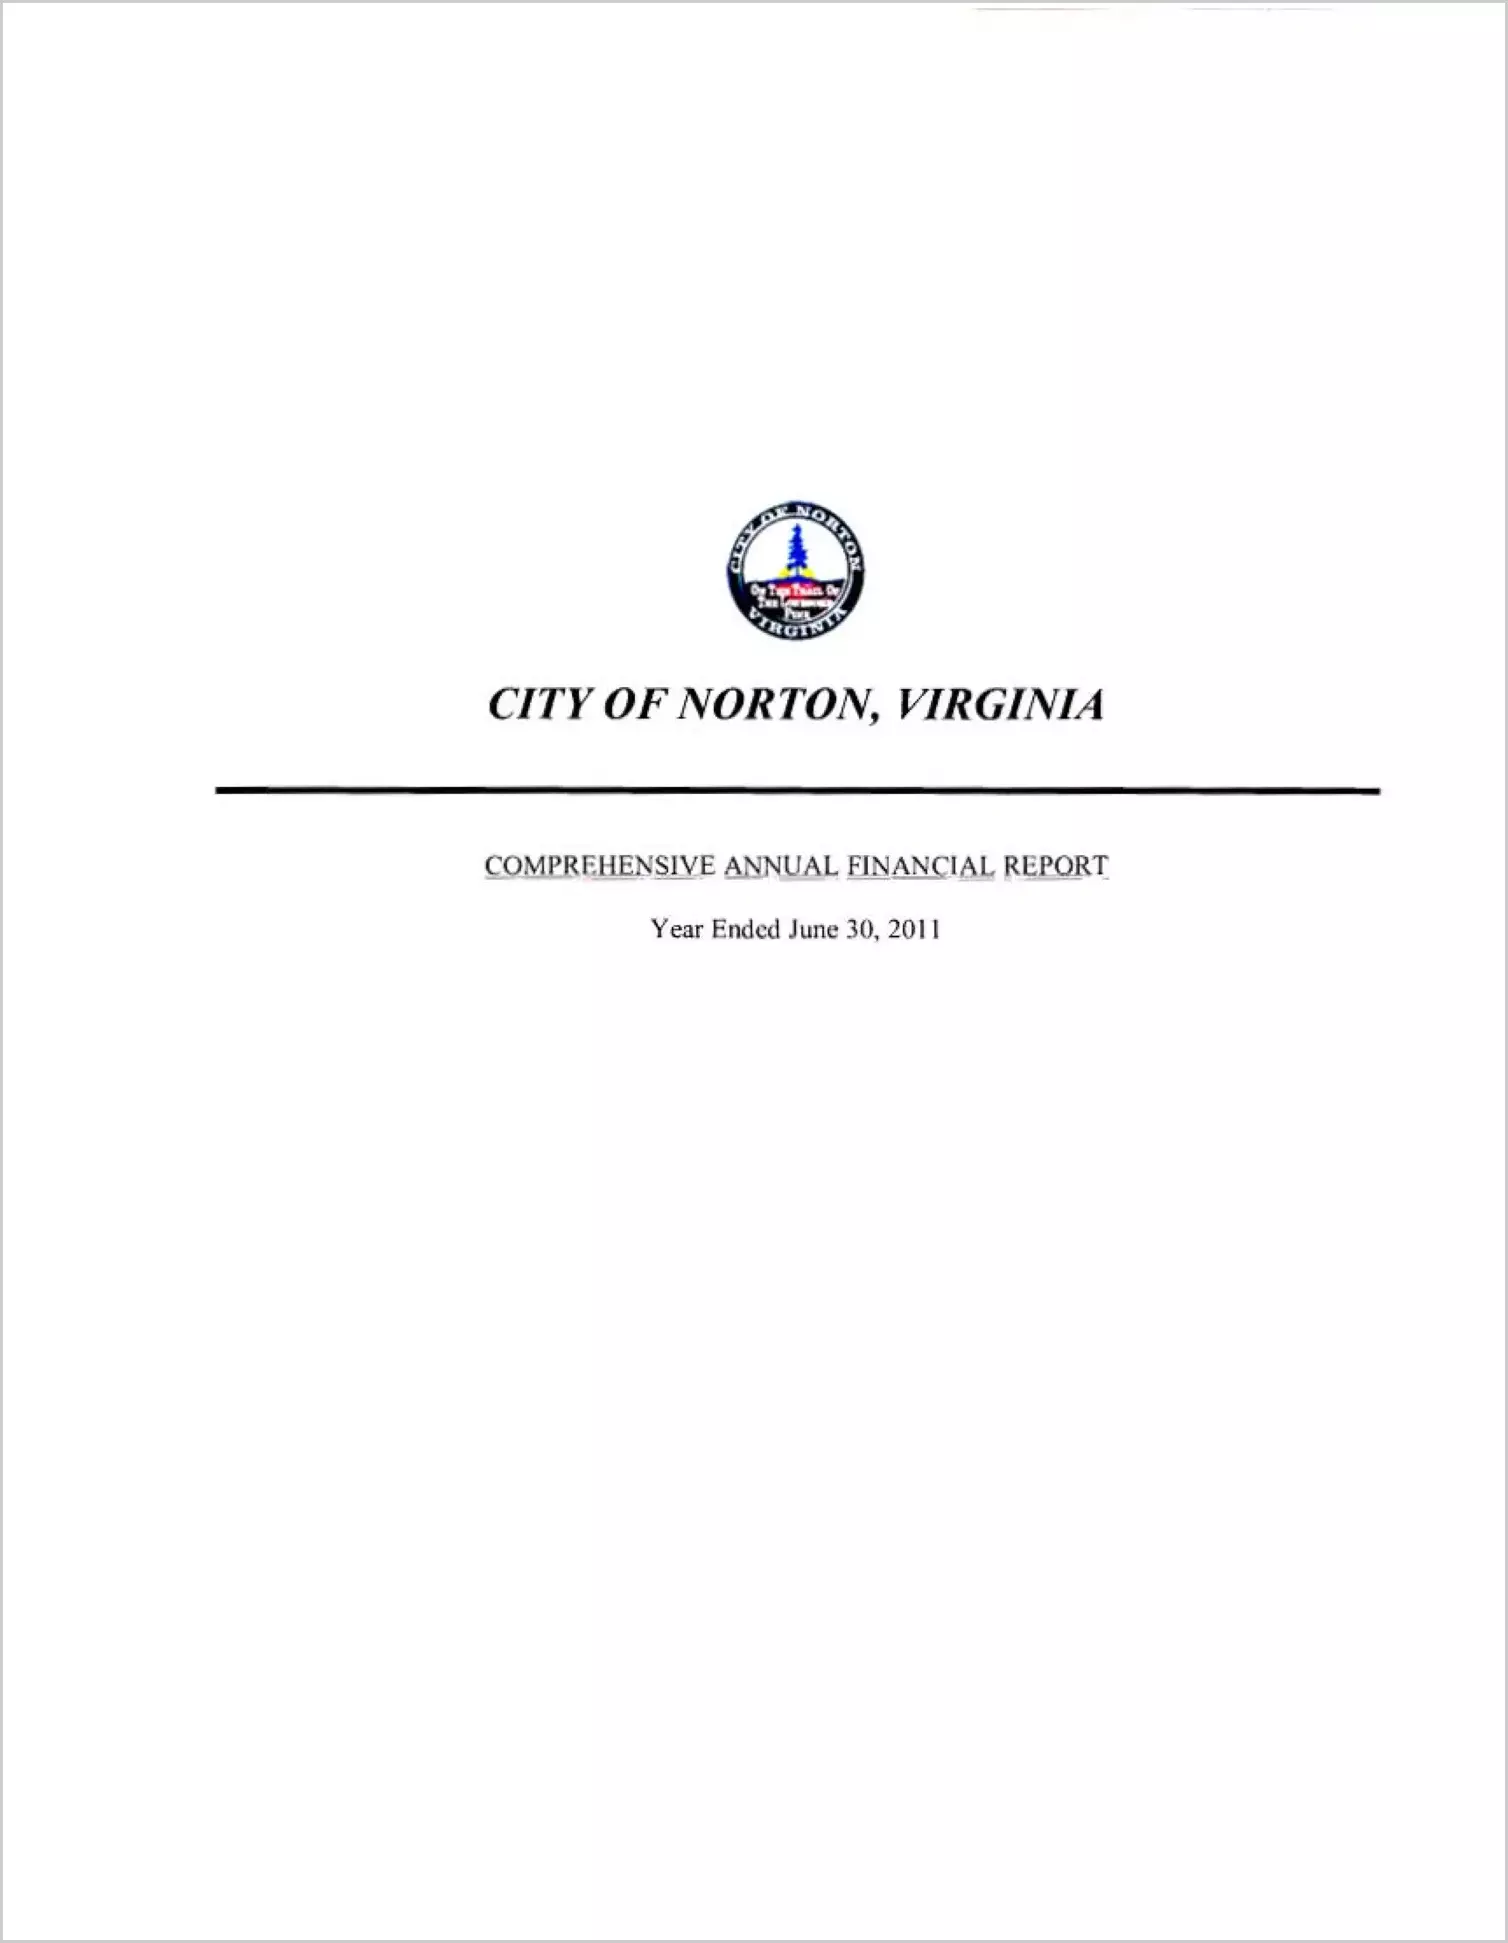 2011 Annual Financial Report for City of Norton